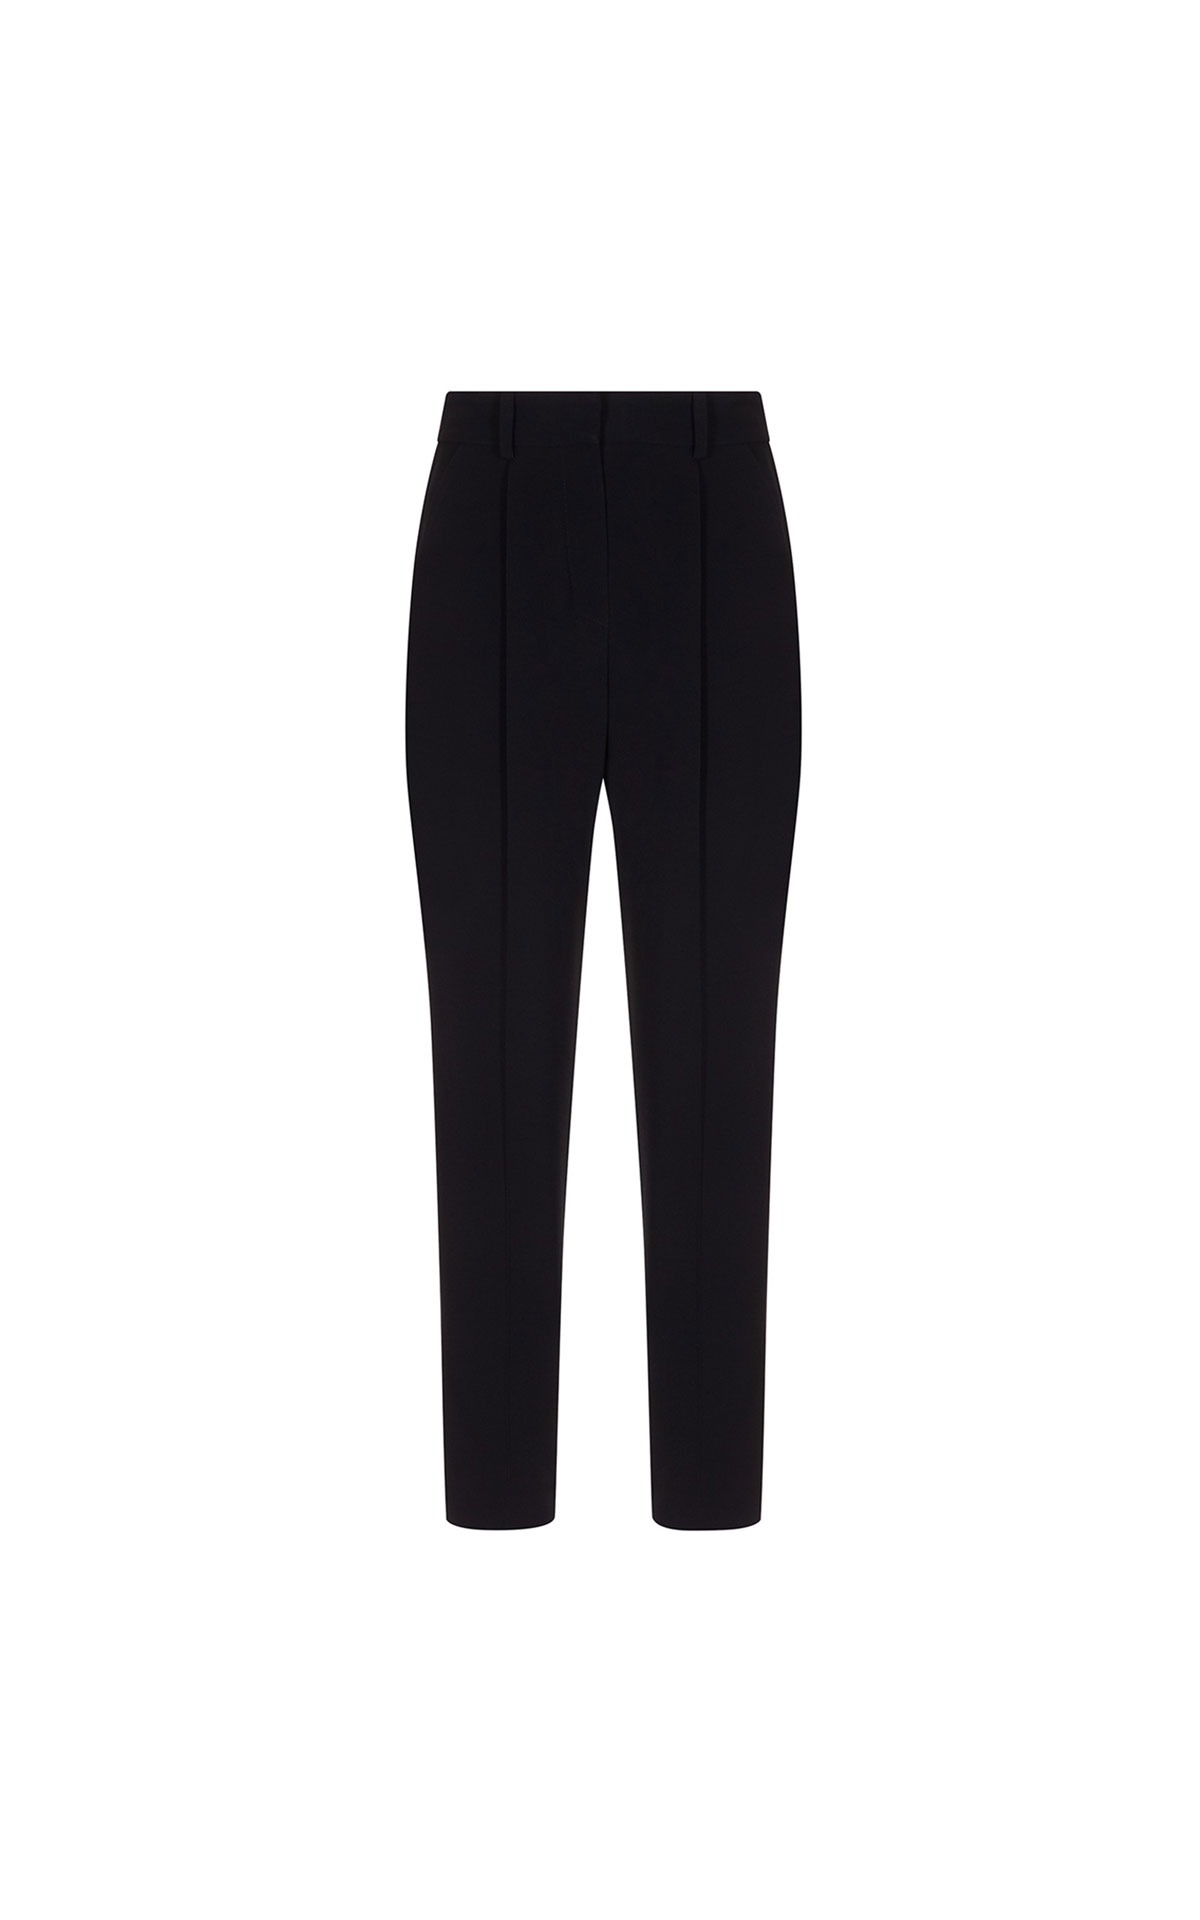 Armani Ladies trousers from Bicester Village